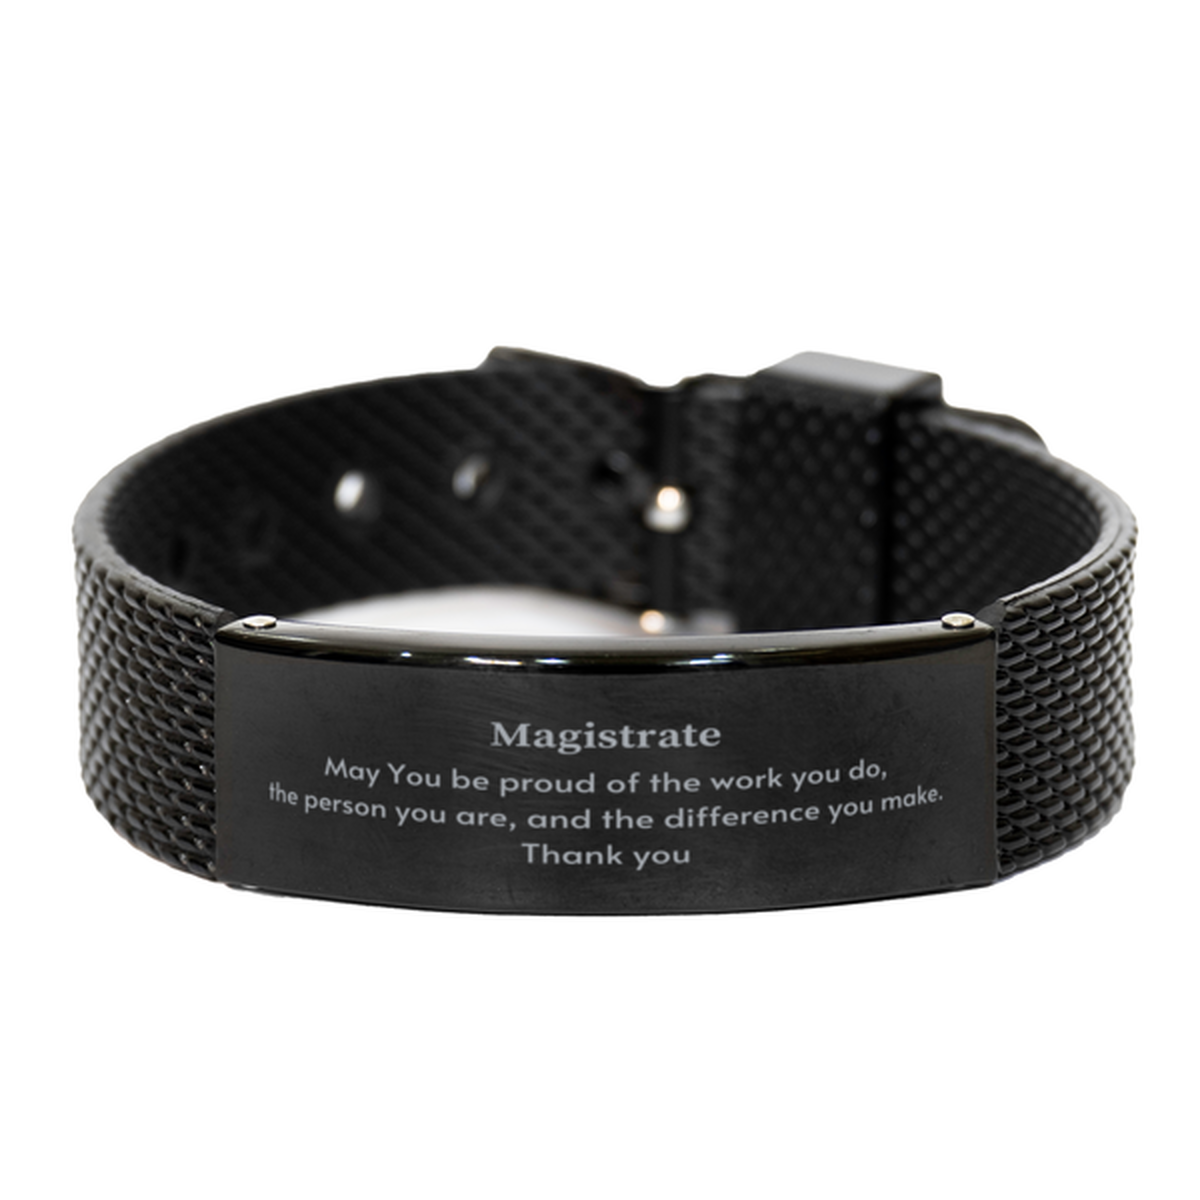 Heartwarming Black Shark Mesh Bracelet Retirement Coworkers Gifts for Magistrate, Magistrate May You be proud of the work you do, the person you are Gifts for Boss Men Women Friends